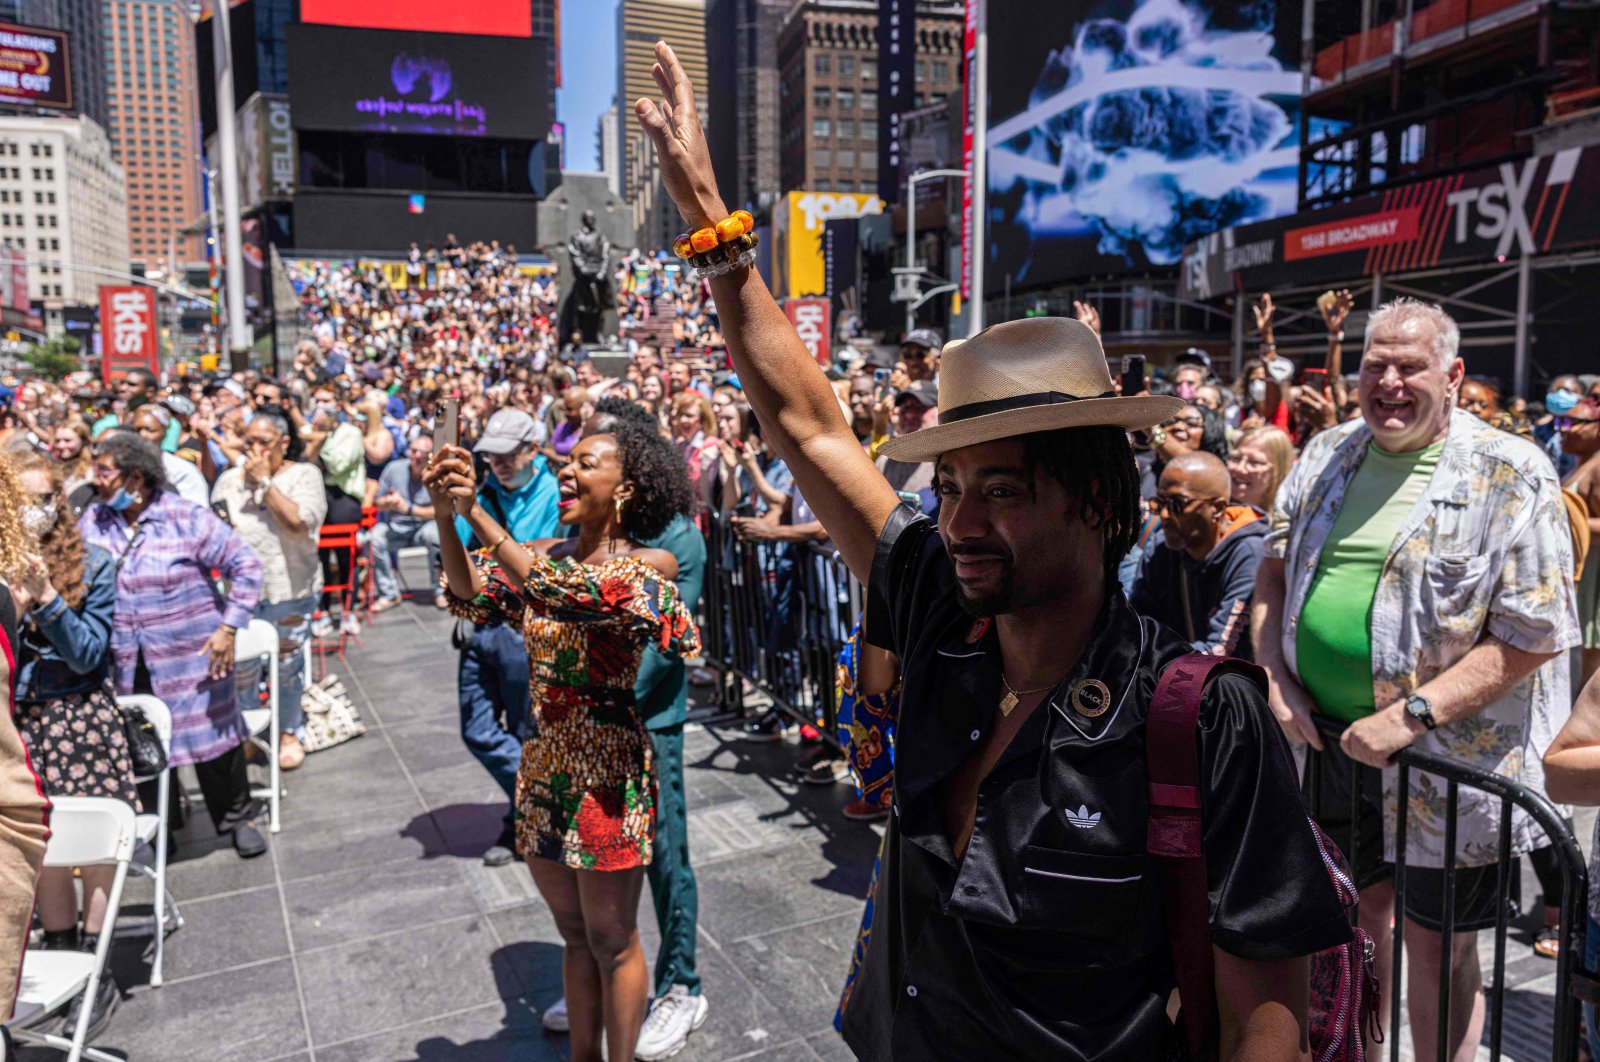 An onlooker reacts to a performance during a Juneteenth celebration in Times Square, in the Manhattan borough of New York, U.S., June 19, 2022. (AFP Photo)